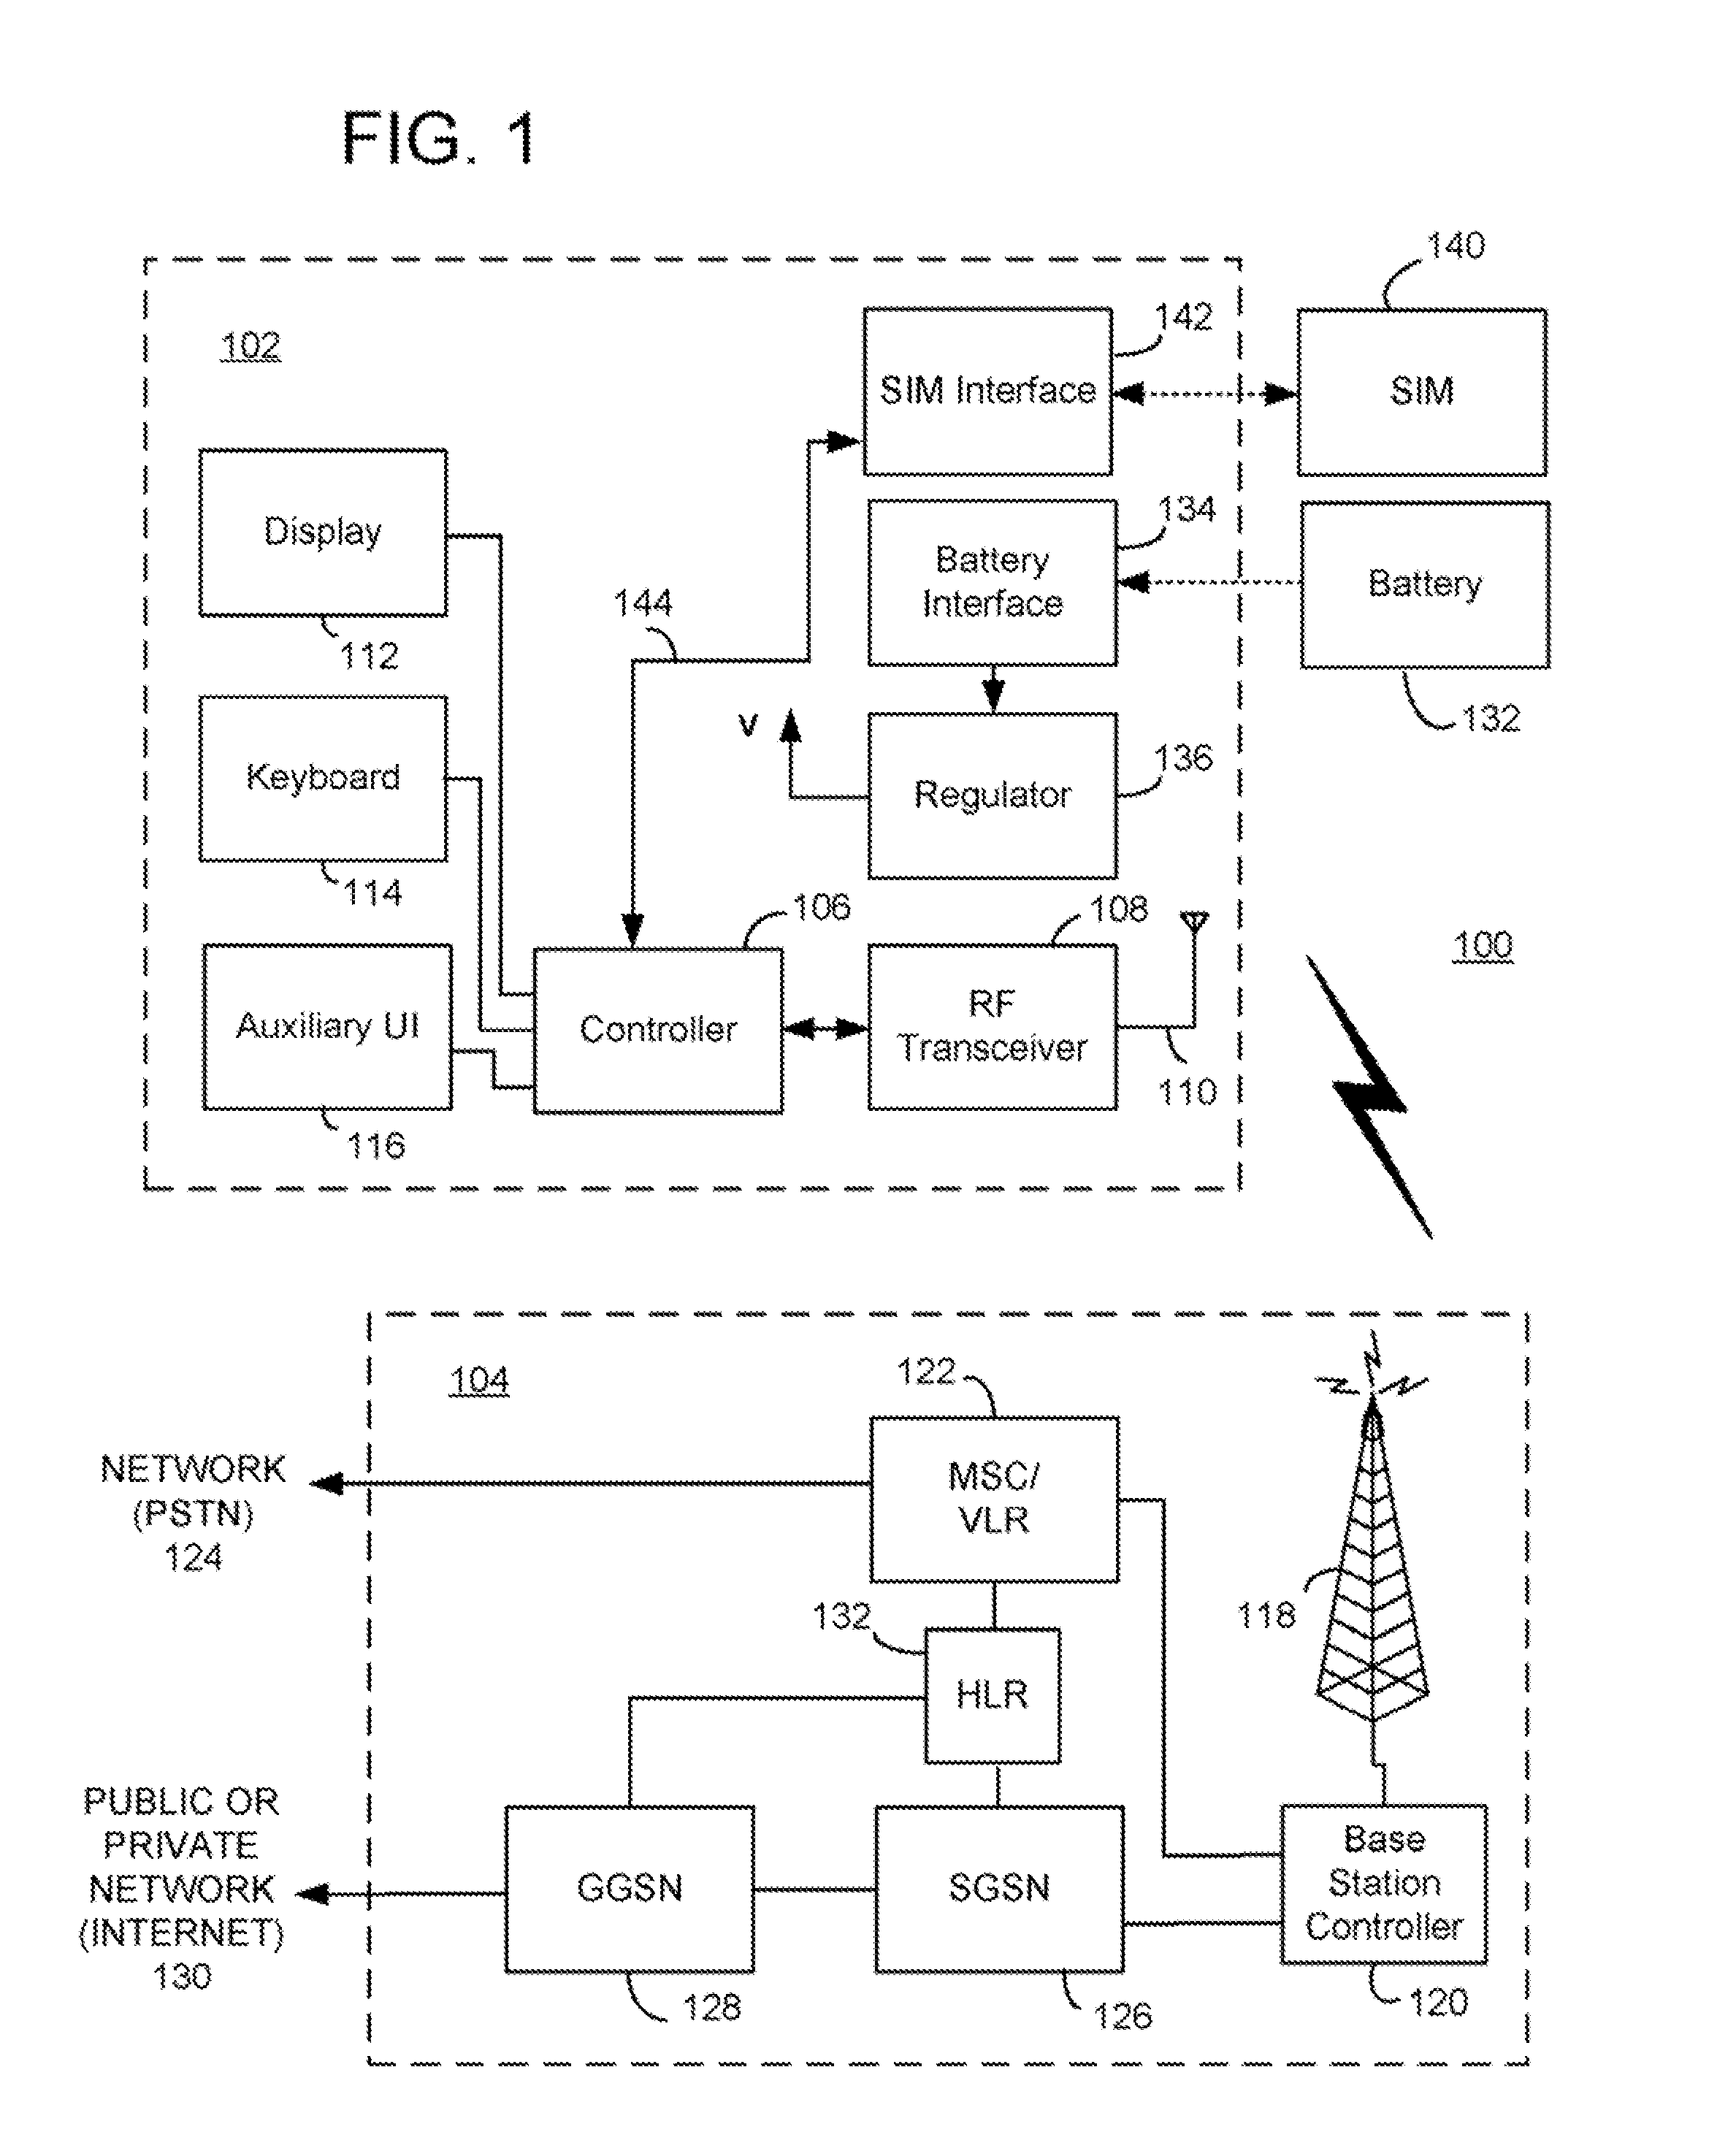 User interface methods and apparatus for controlling the visual display of maps having selectable map elements in mobile communication devices